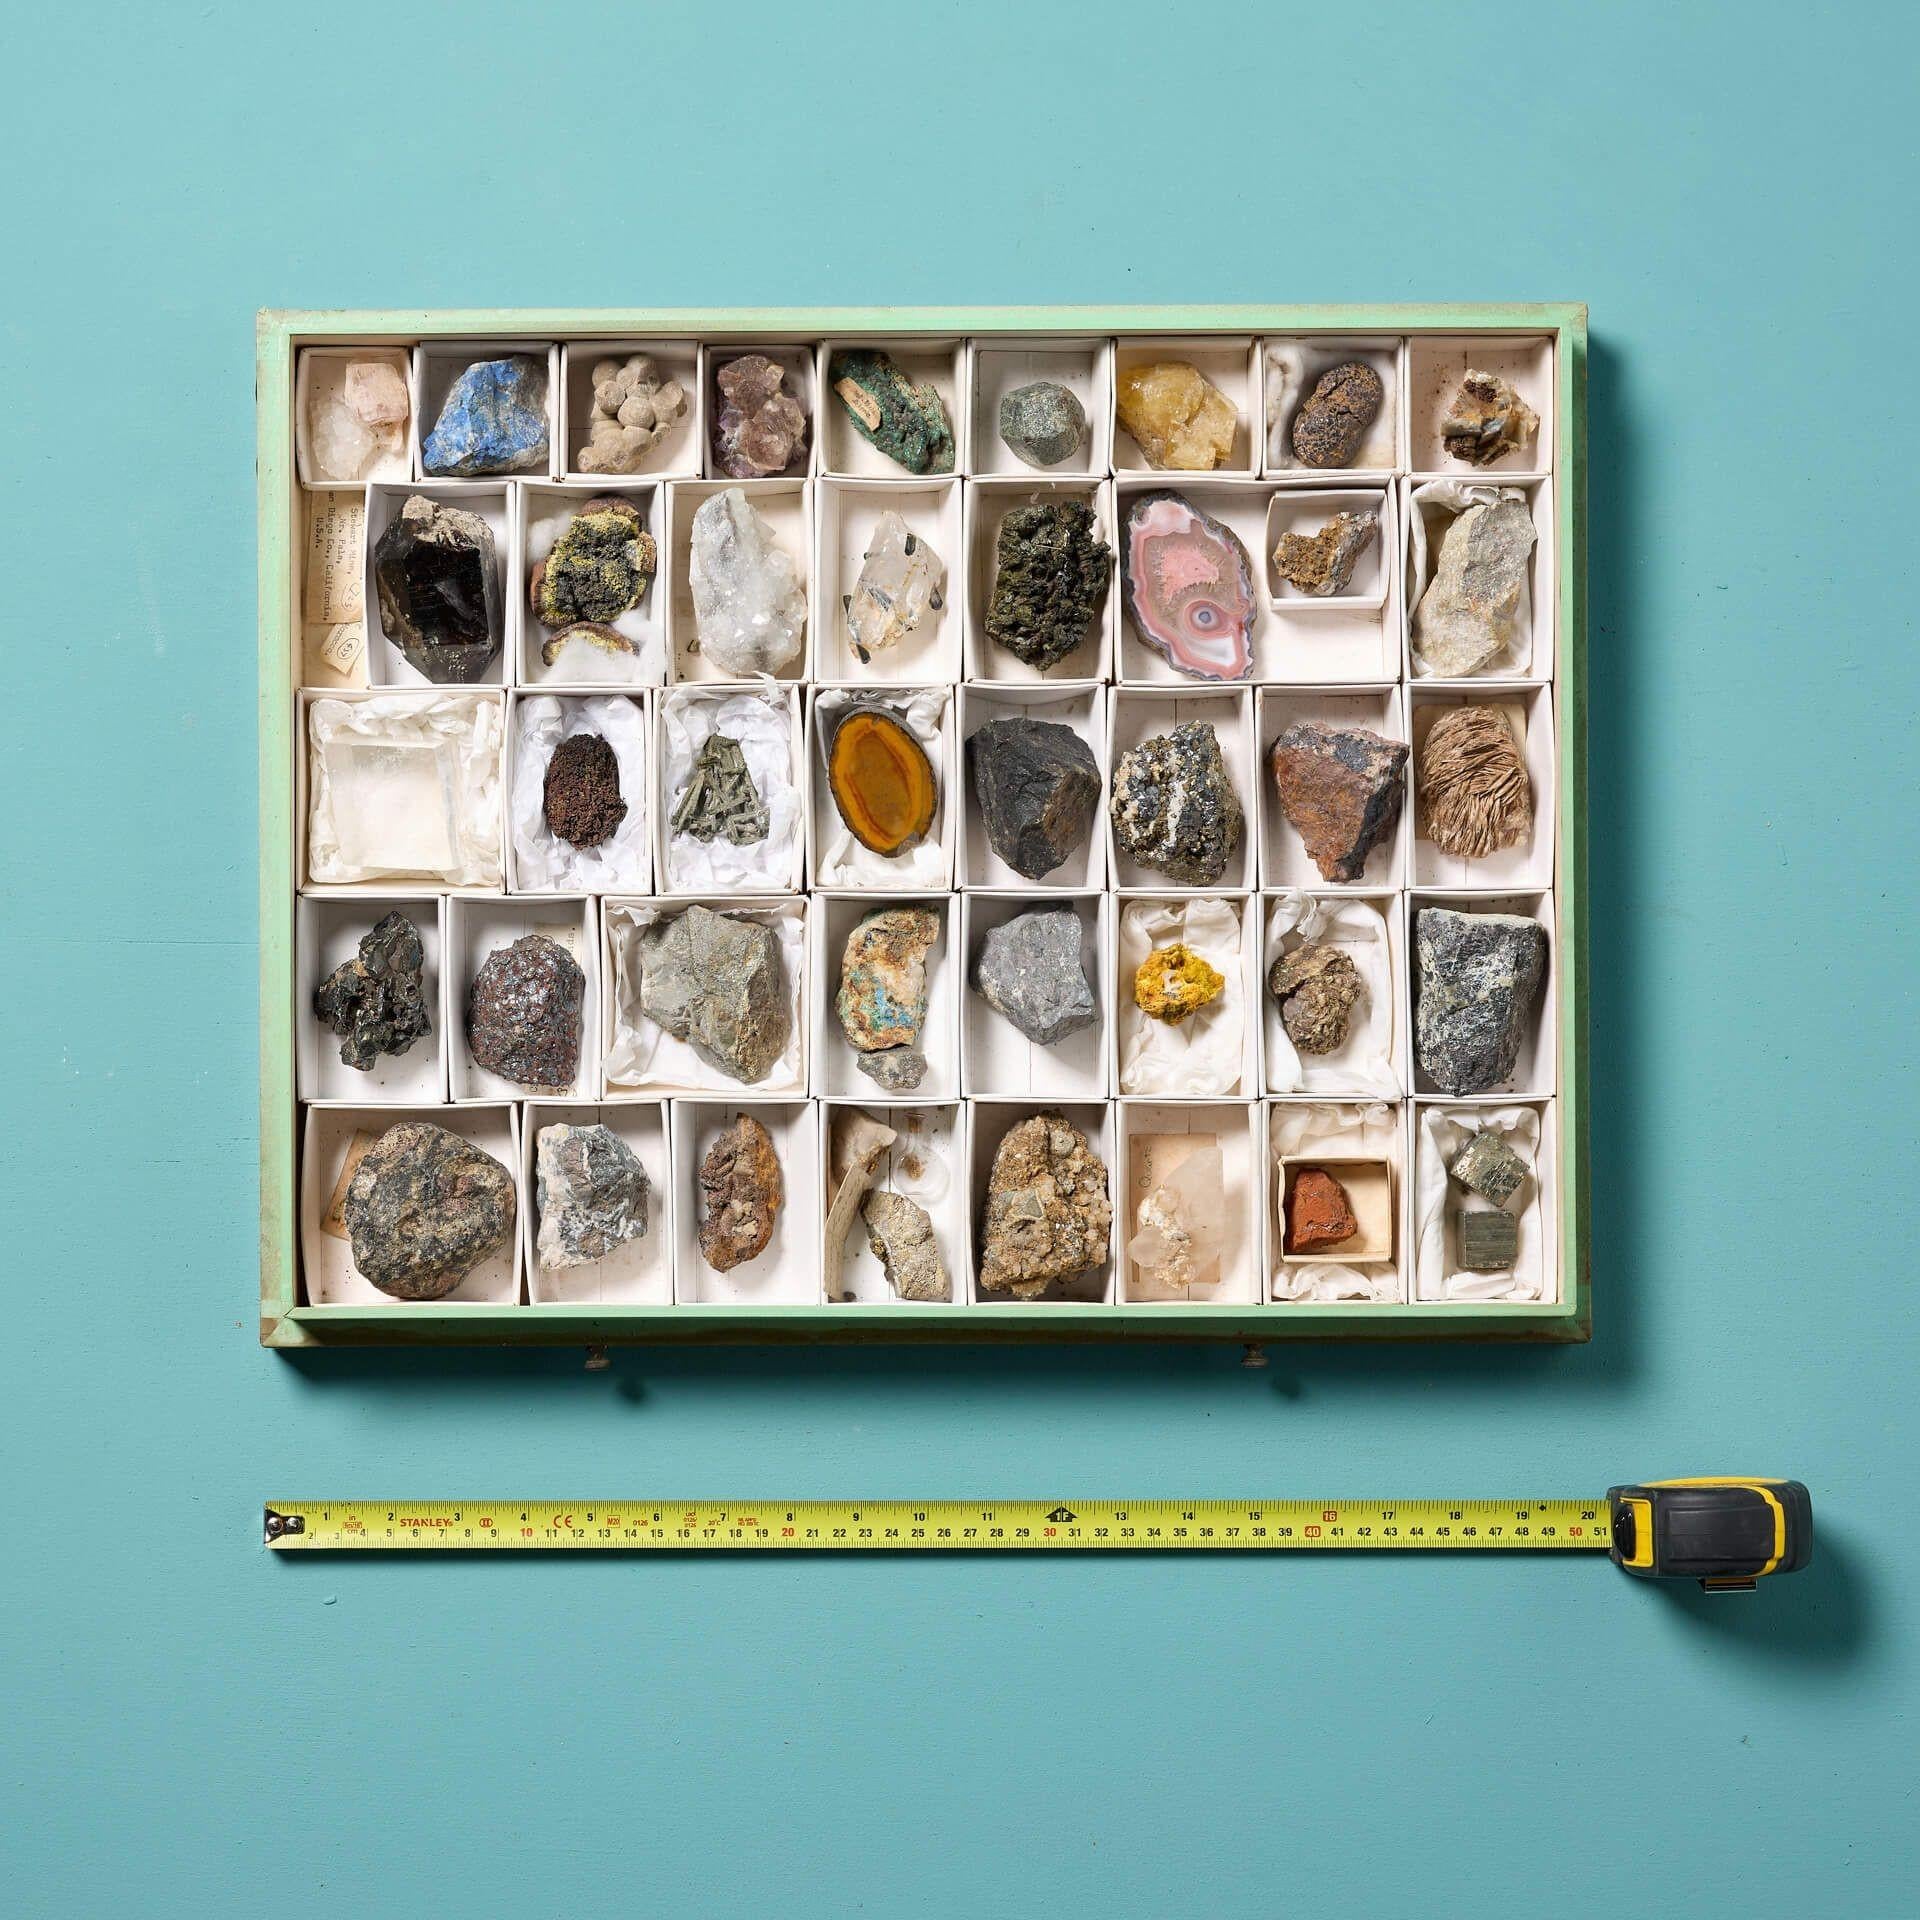 A collection of museum minerals in a display case. Presented in a sleek glazed case, the set includes 48 European minerals, including a gold vial, a rock with traces of gold, lapis lazurite, and pyrite with calcite, all with their own striking